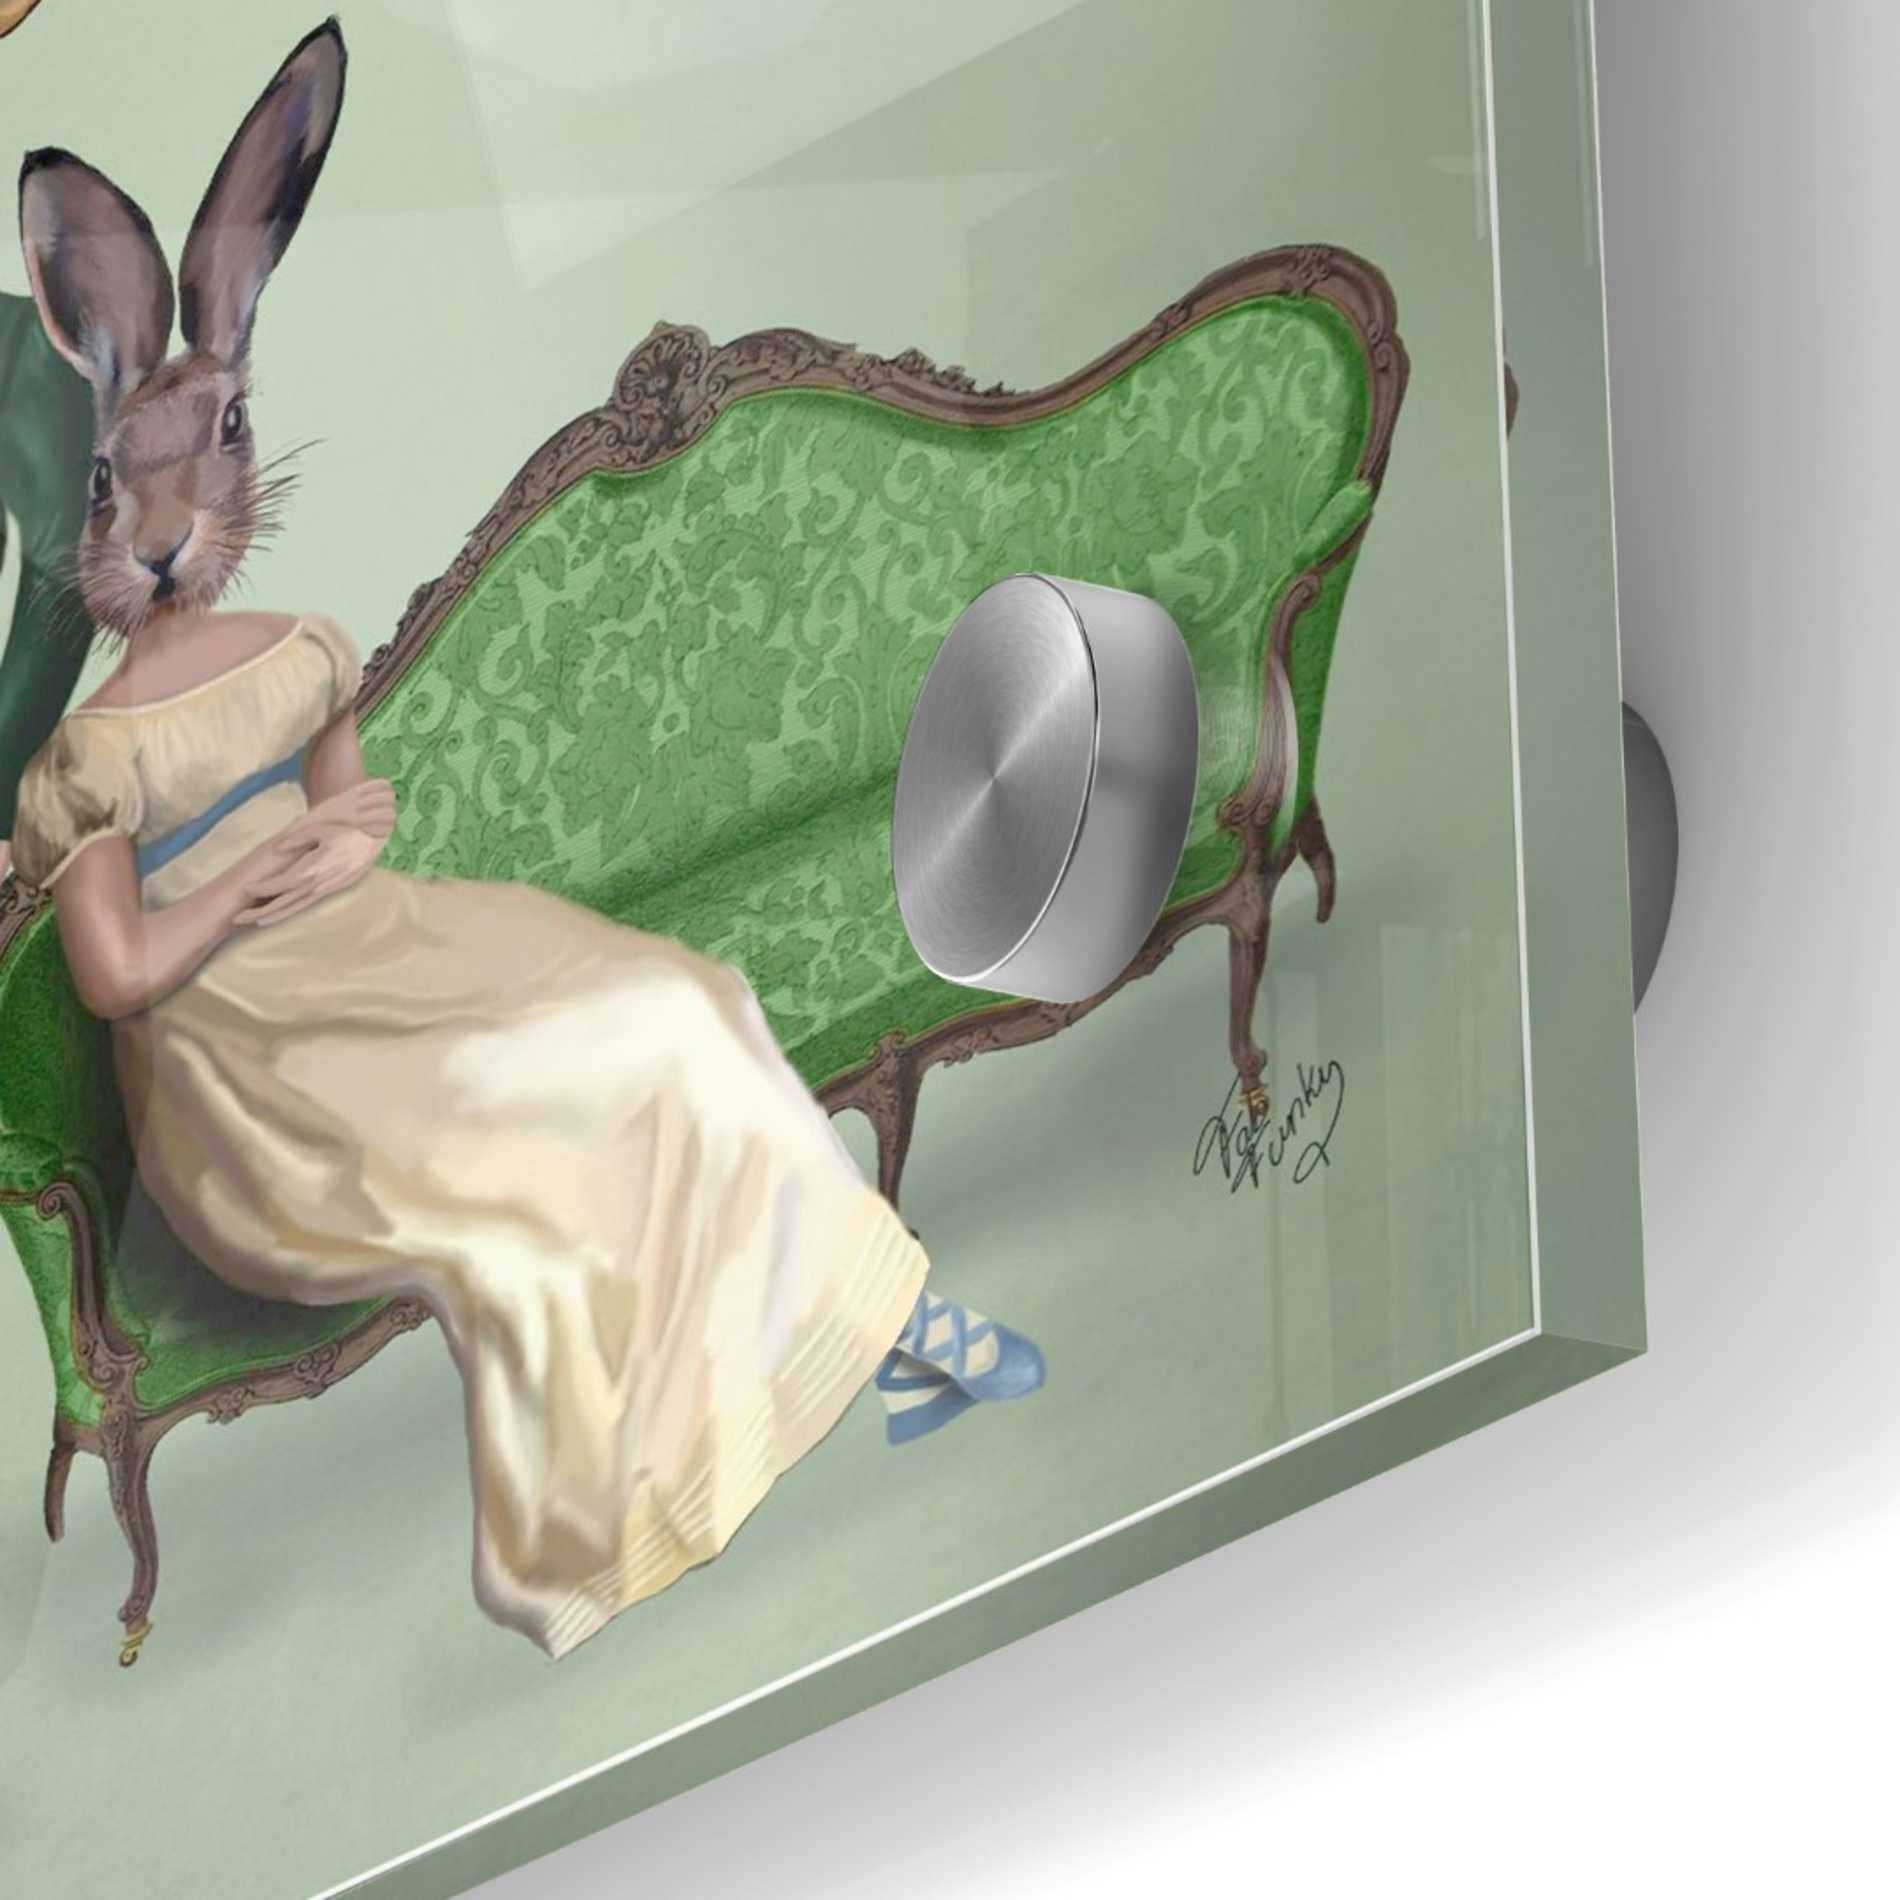 Epic Art 'Mr Deer and Mrs Rabbit' by Fab Funky Acrylic Glass Wall Art,36x36